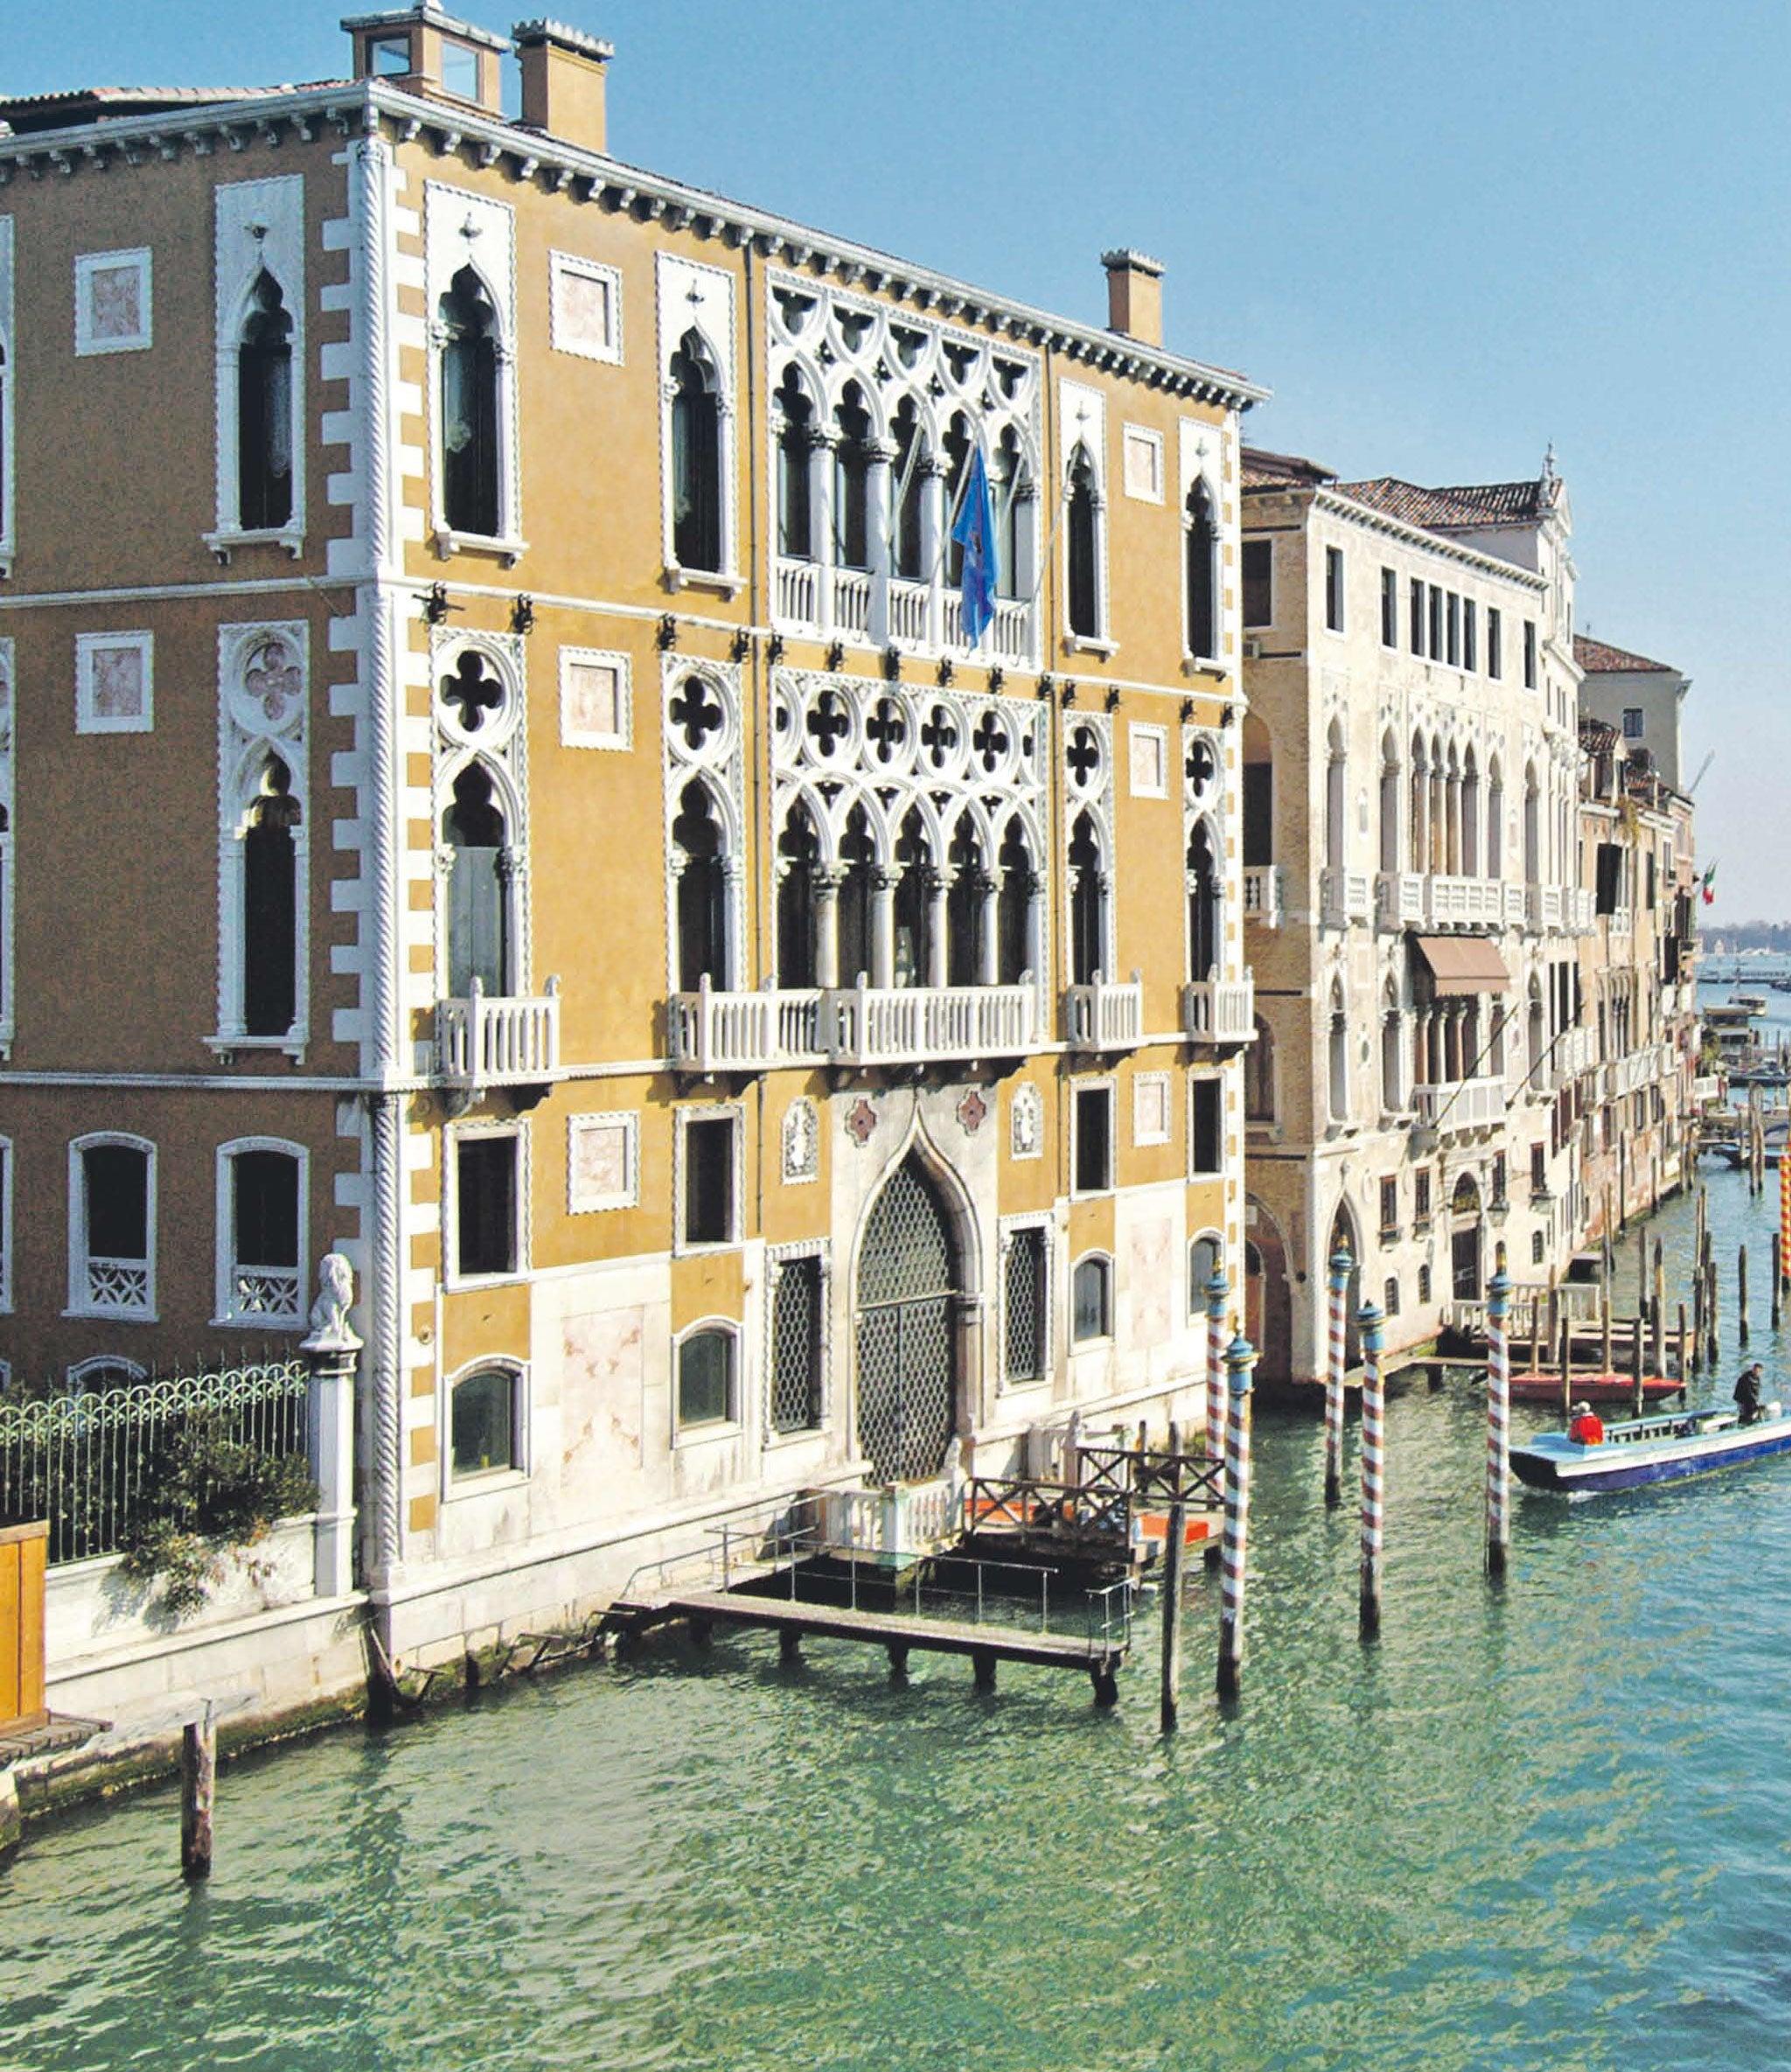 Venice is an ideal holiday destination for couples